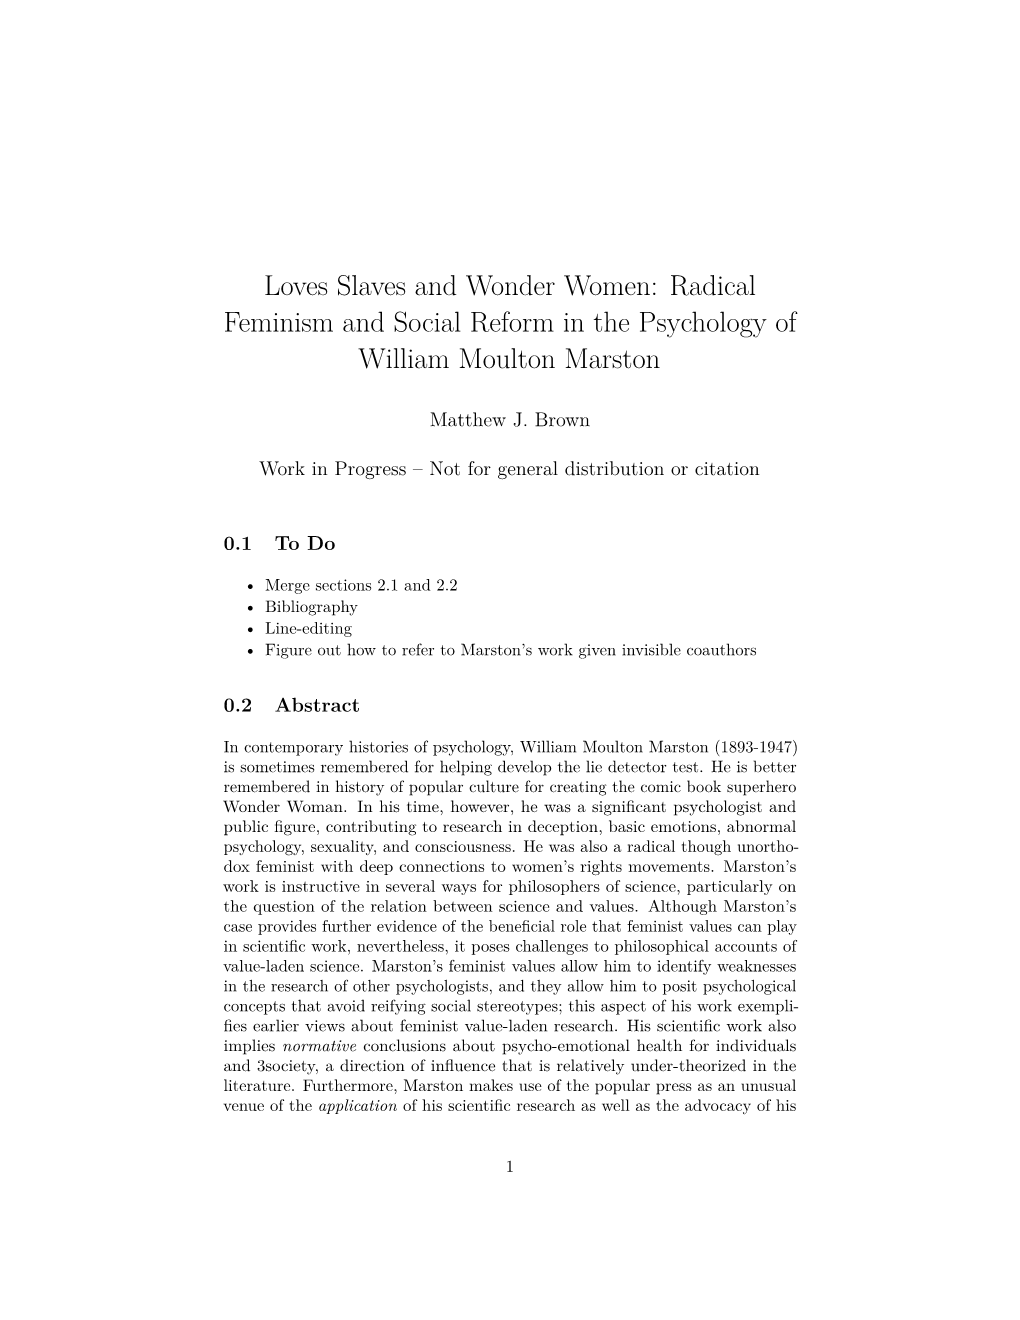 Loves Slaves and Wonder Women: Radical Feminism and Social Reform in the Psychology of William Moulton Marston